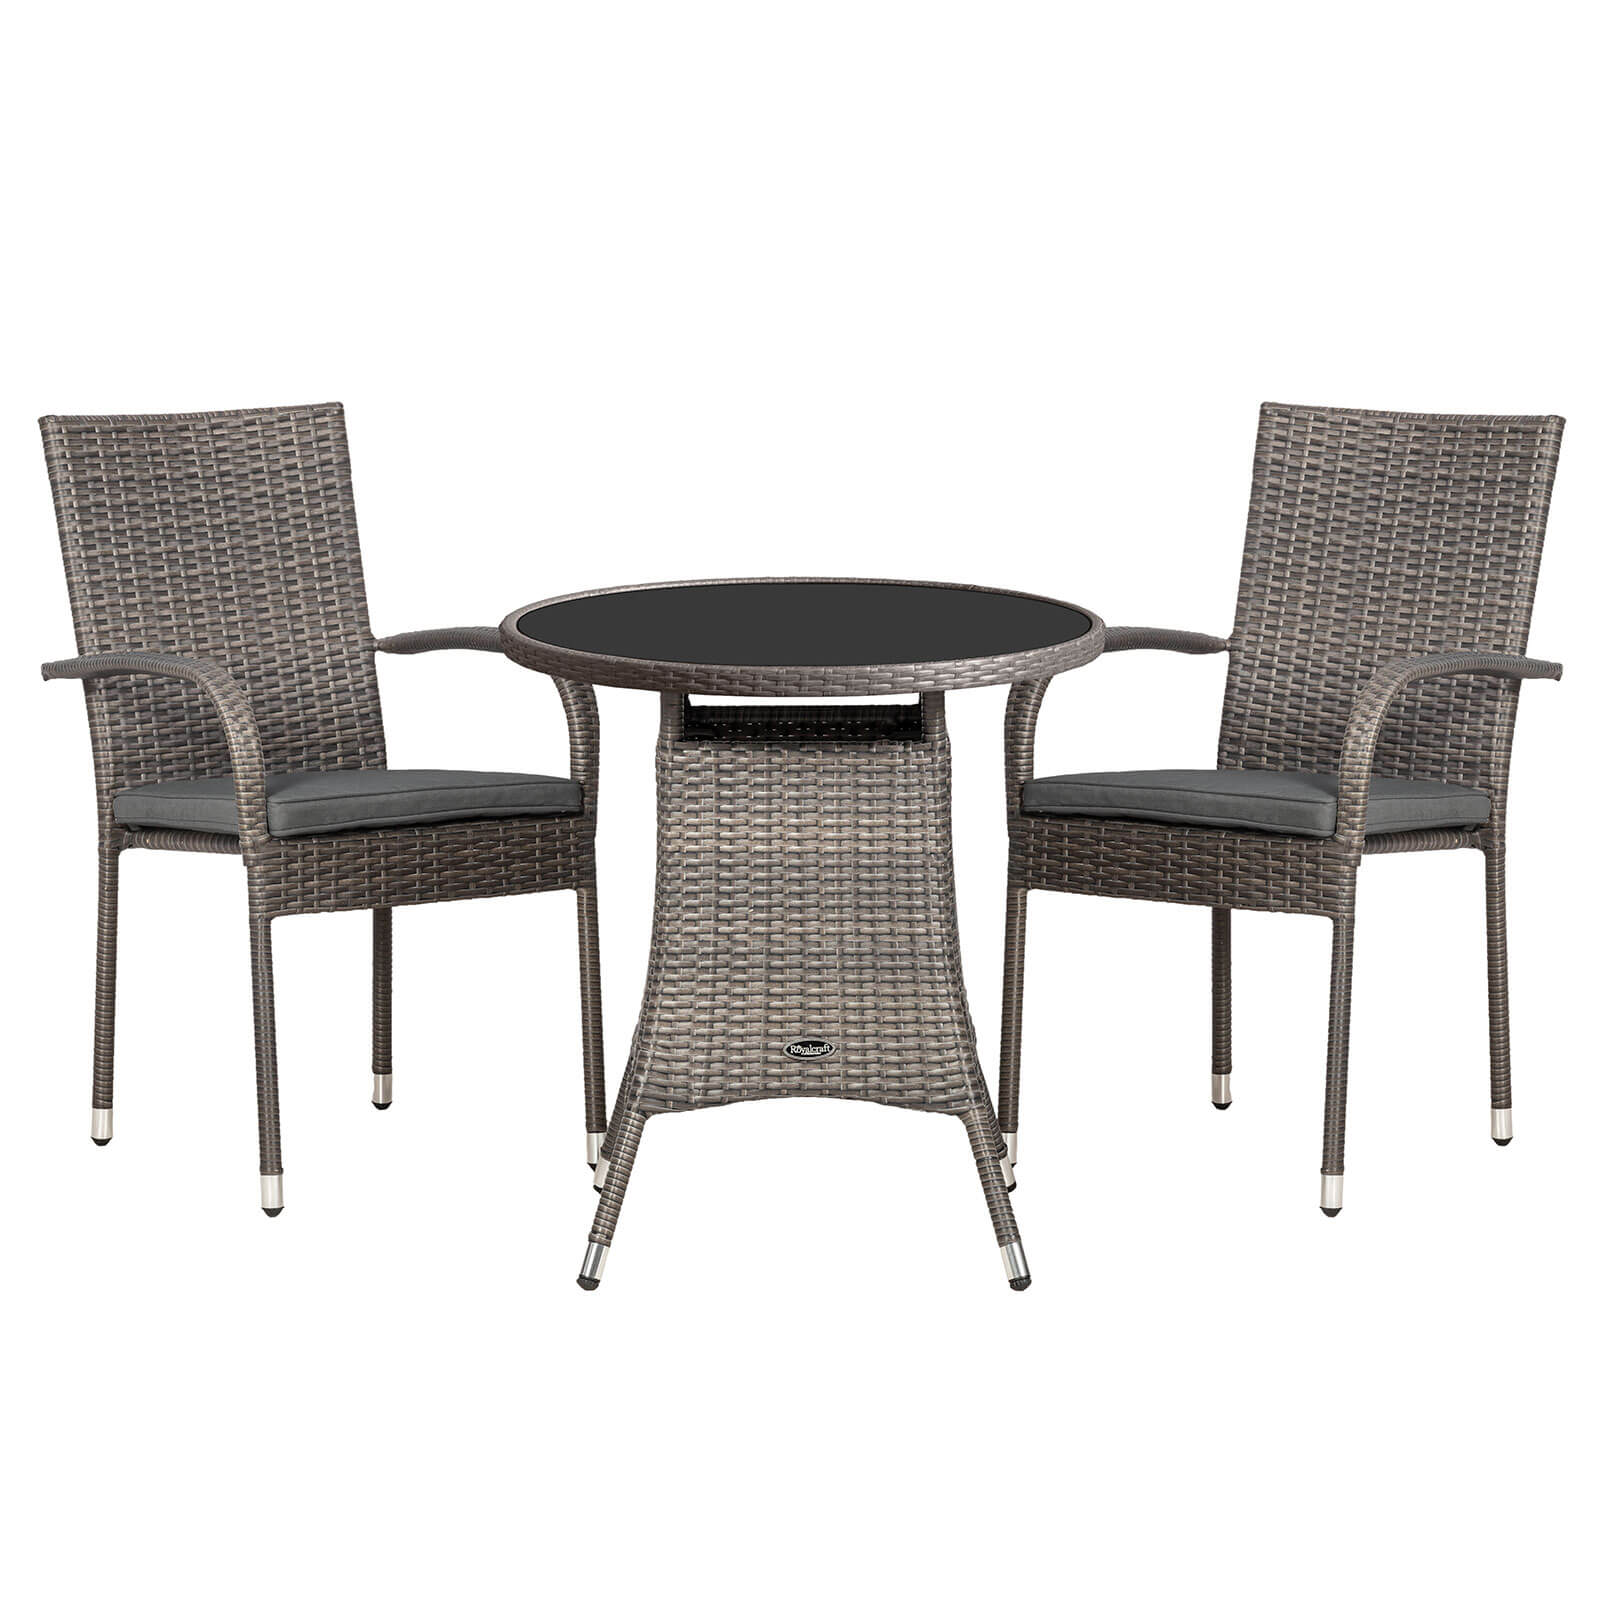 2 seat bistro dining coffee set in grey rattan with glass top table